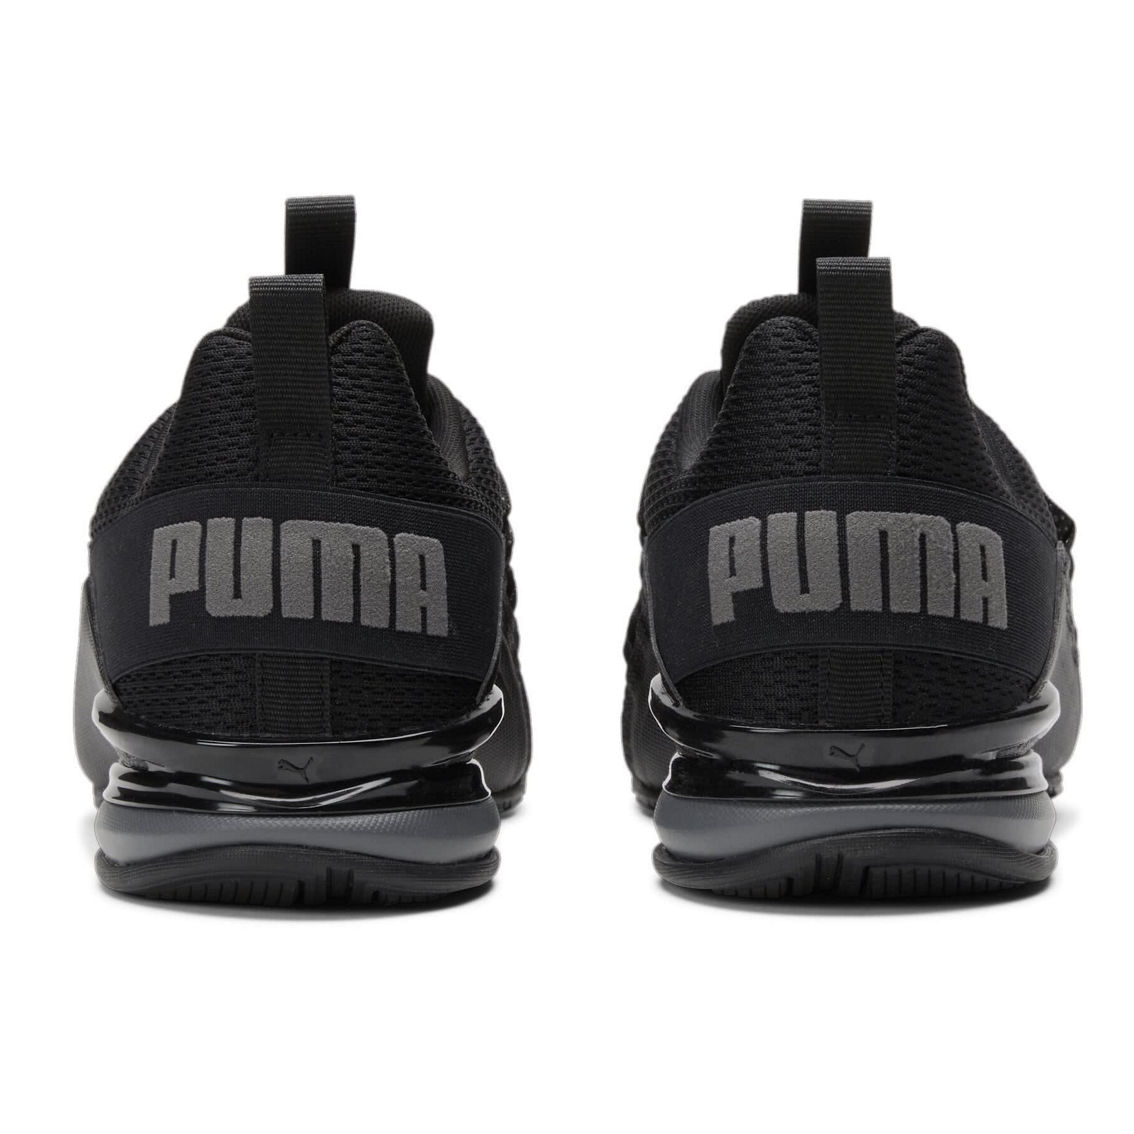 PUMA Men's Axelion Refresh Wide Running Shoes - Image 4 of 5